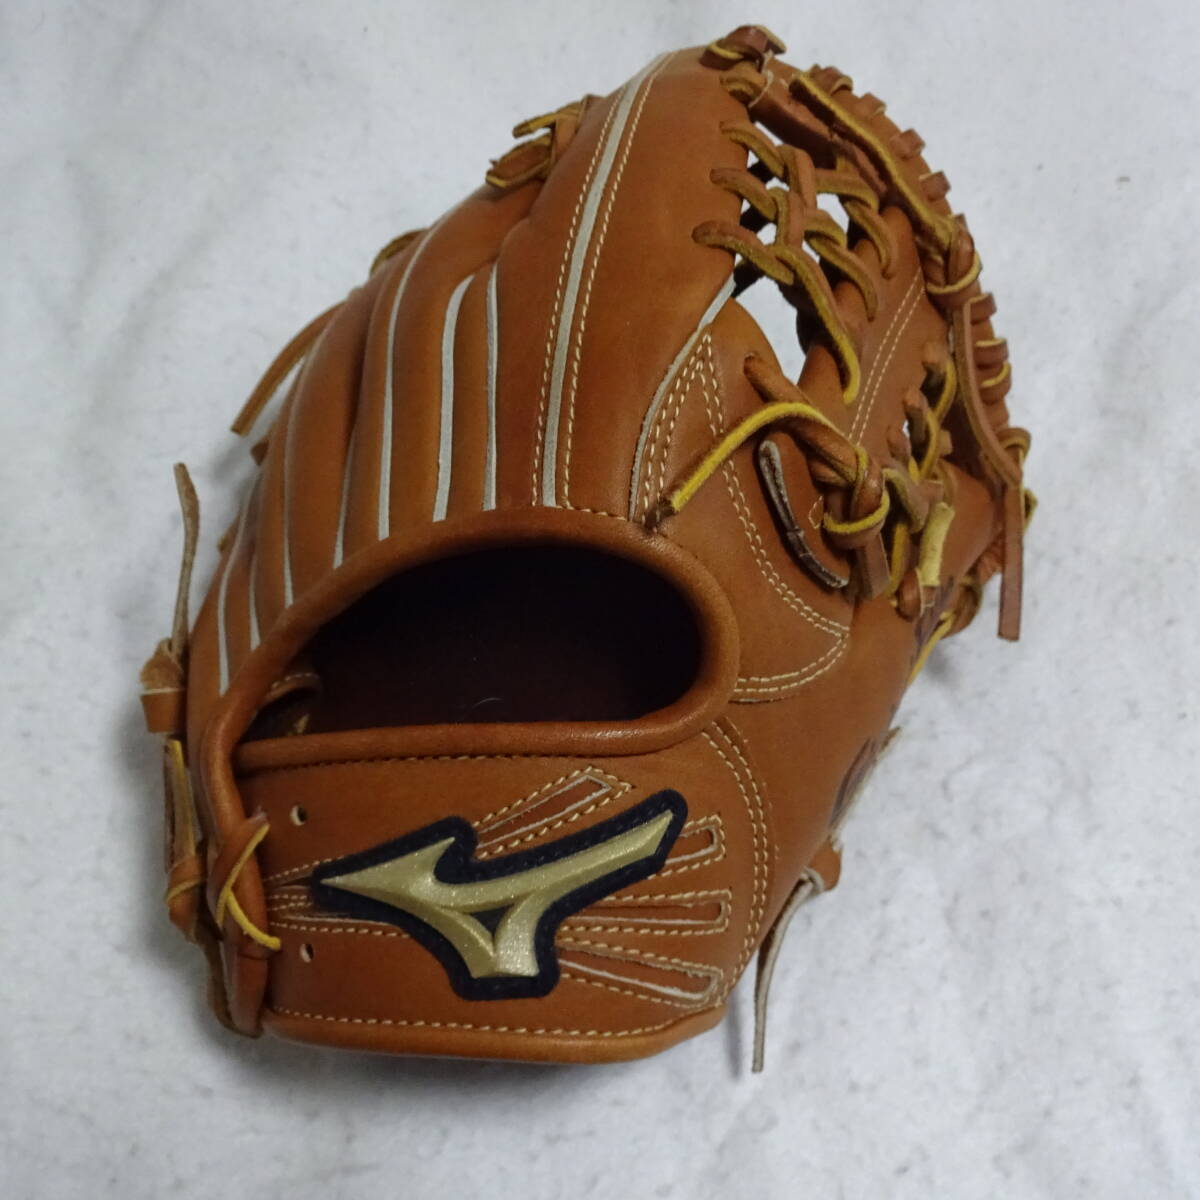  with translation Mizuno glow bar Elite training glove out ... practice for glove 